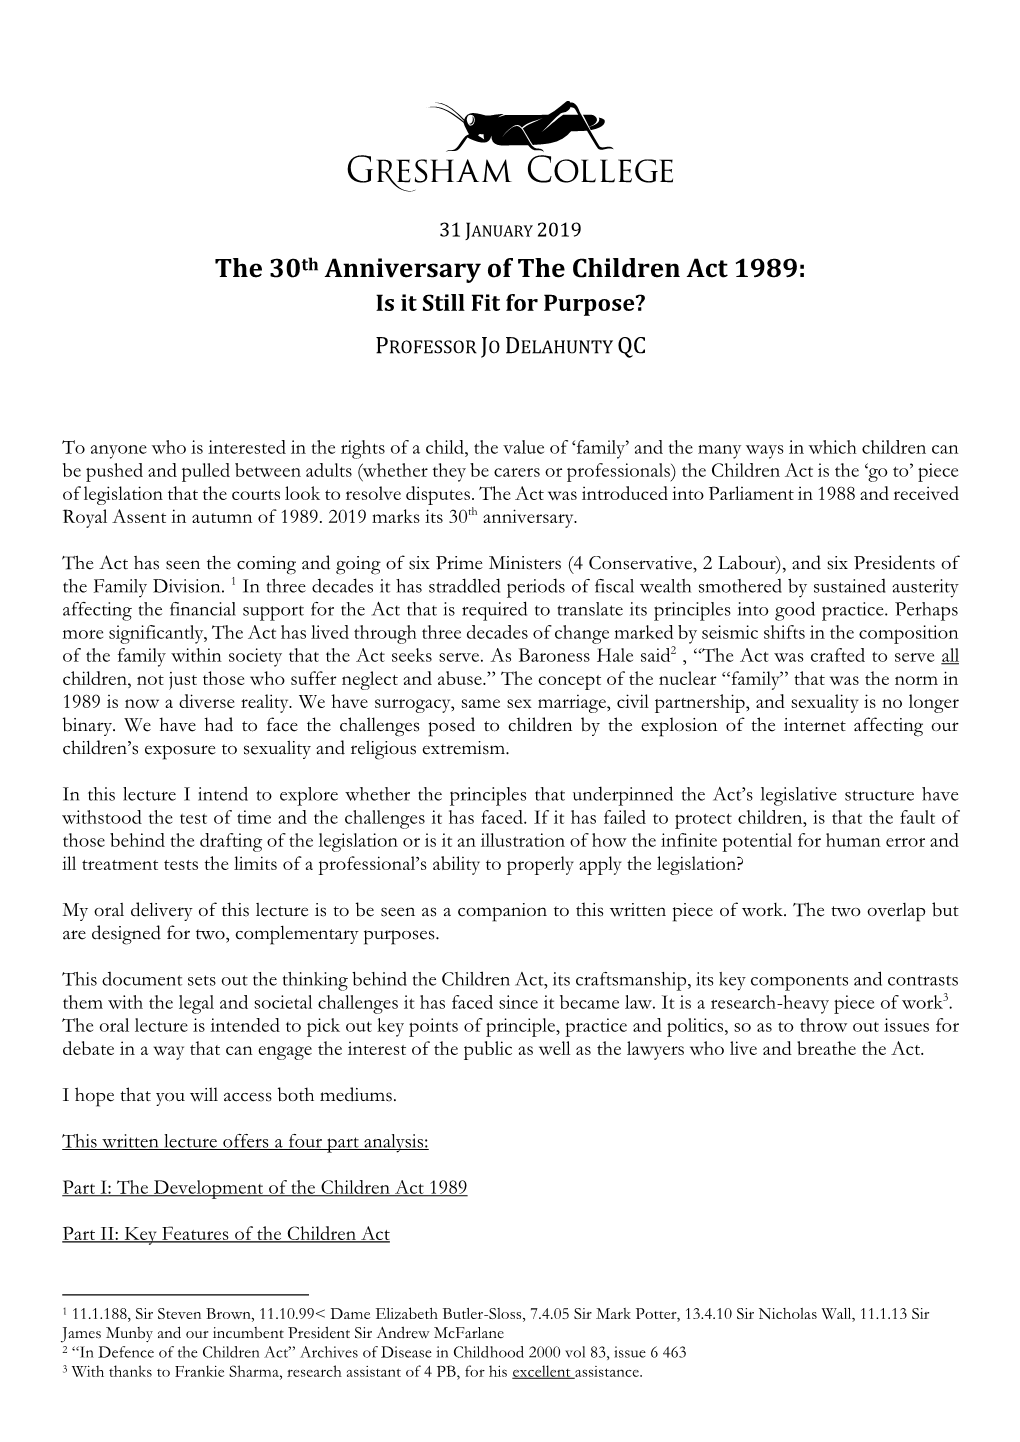 The 30Th Anniversary of the Children Act 1989: Is It Still Fit for Purpose?